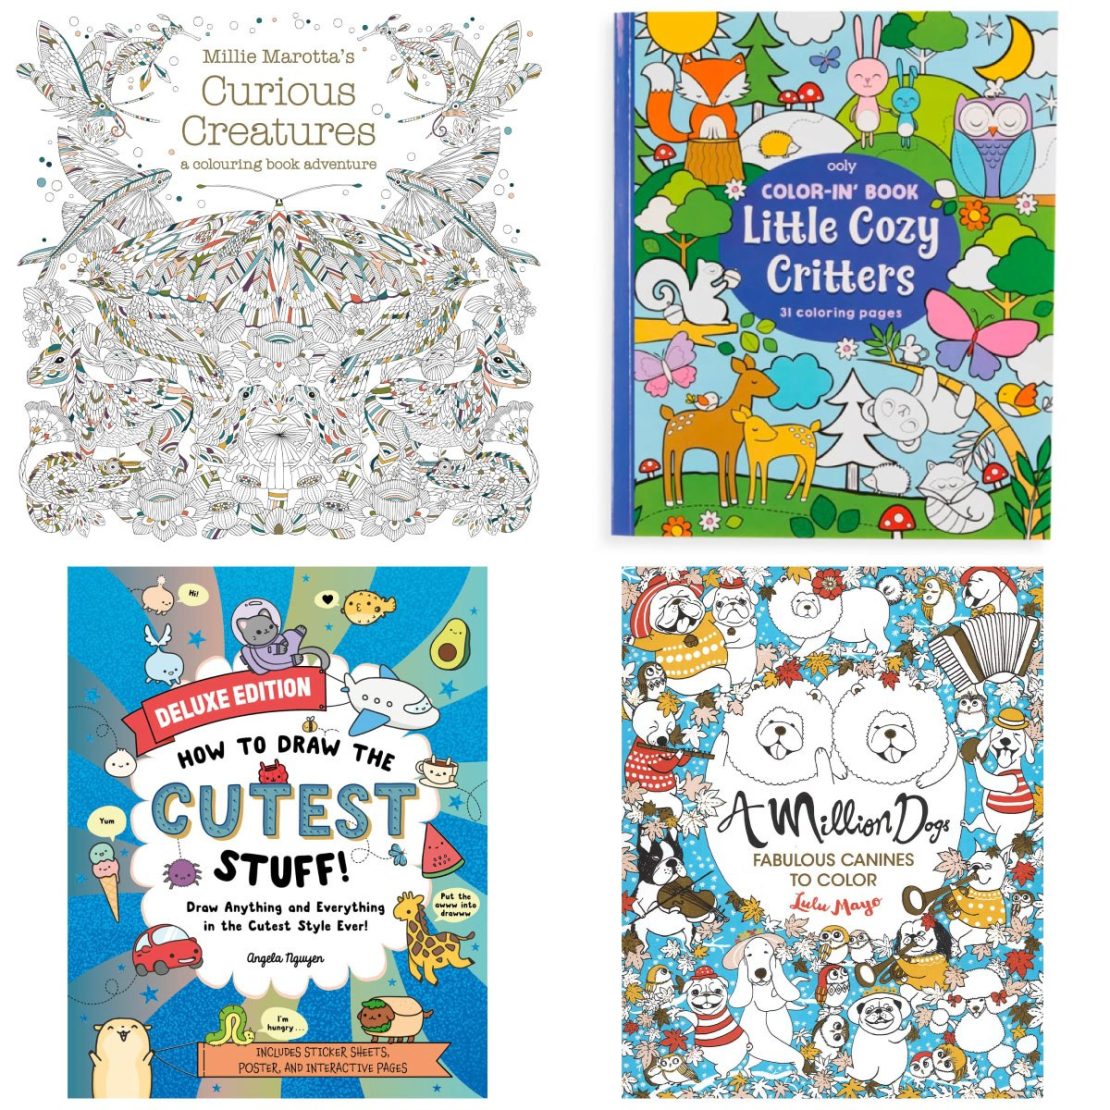 Coloring books for everyone!